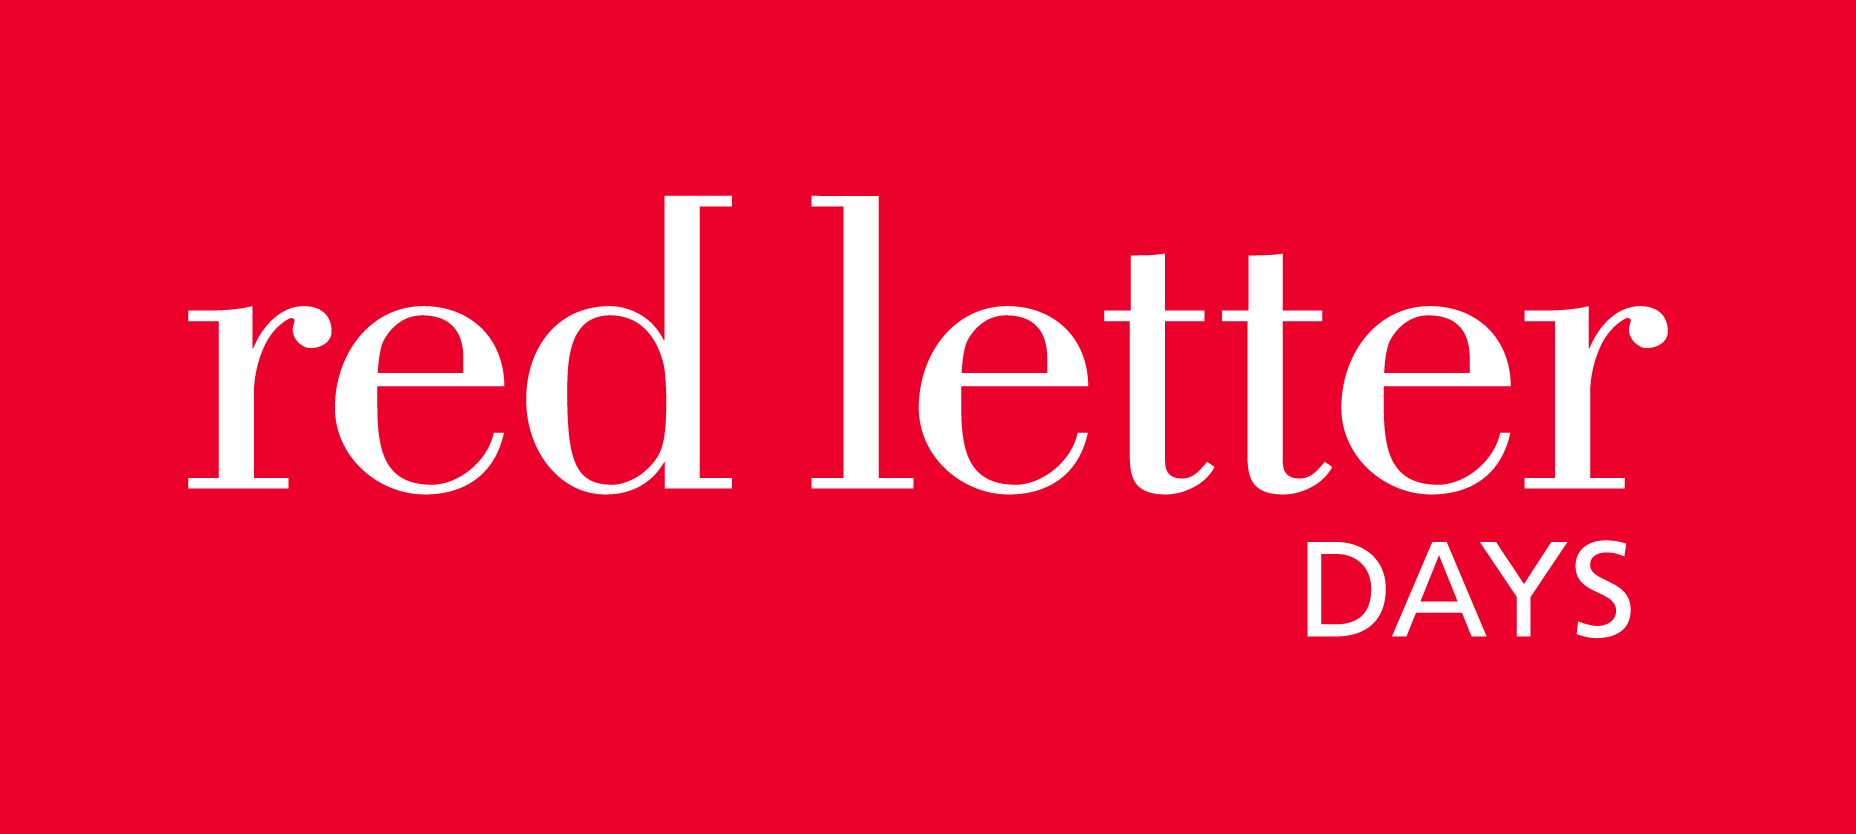 Red and choose. Letter a Red. Red Letter Days. Red Letter Days (Company). Red Lettering.